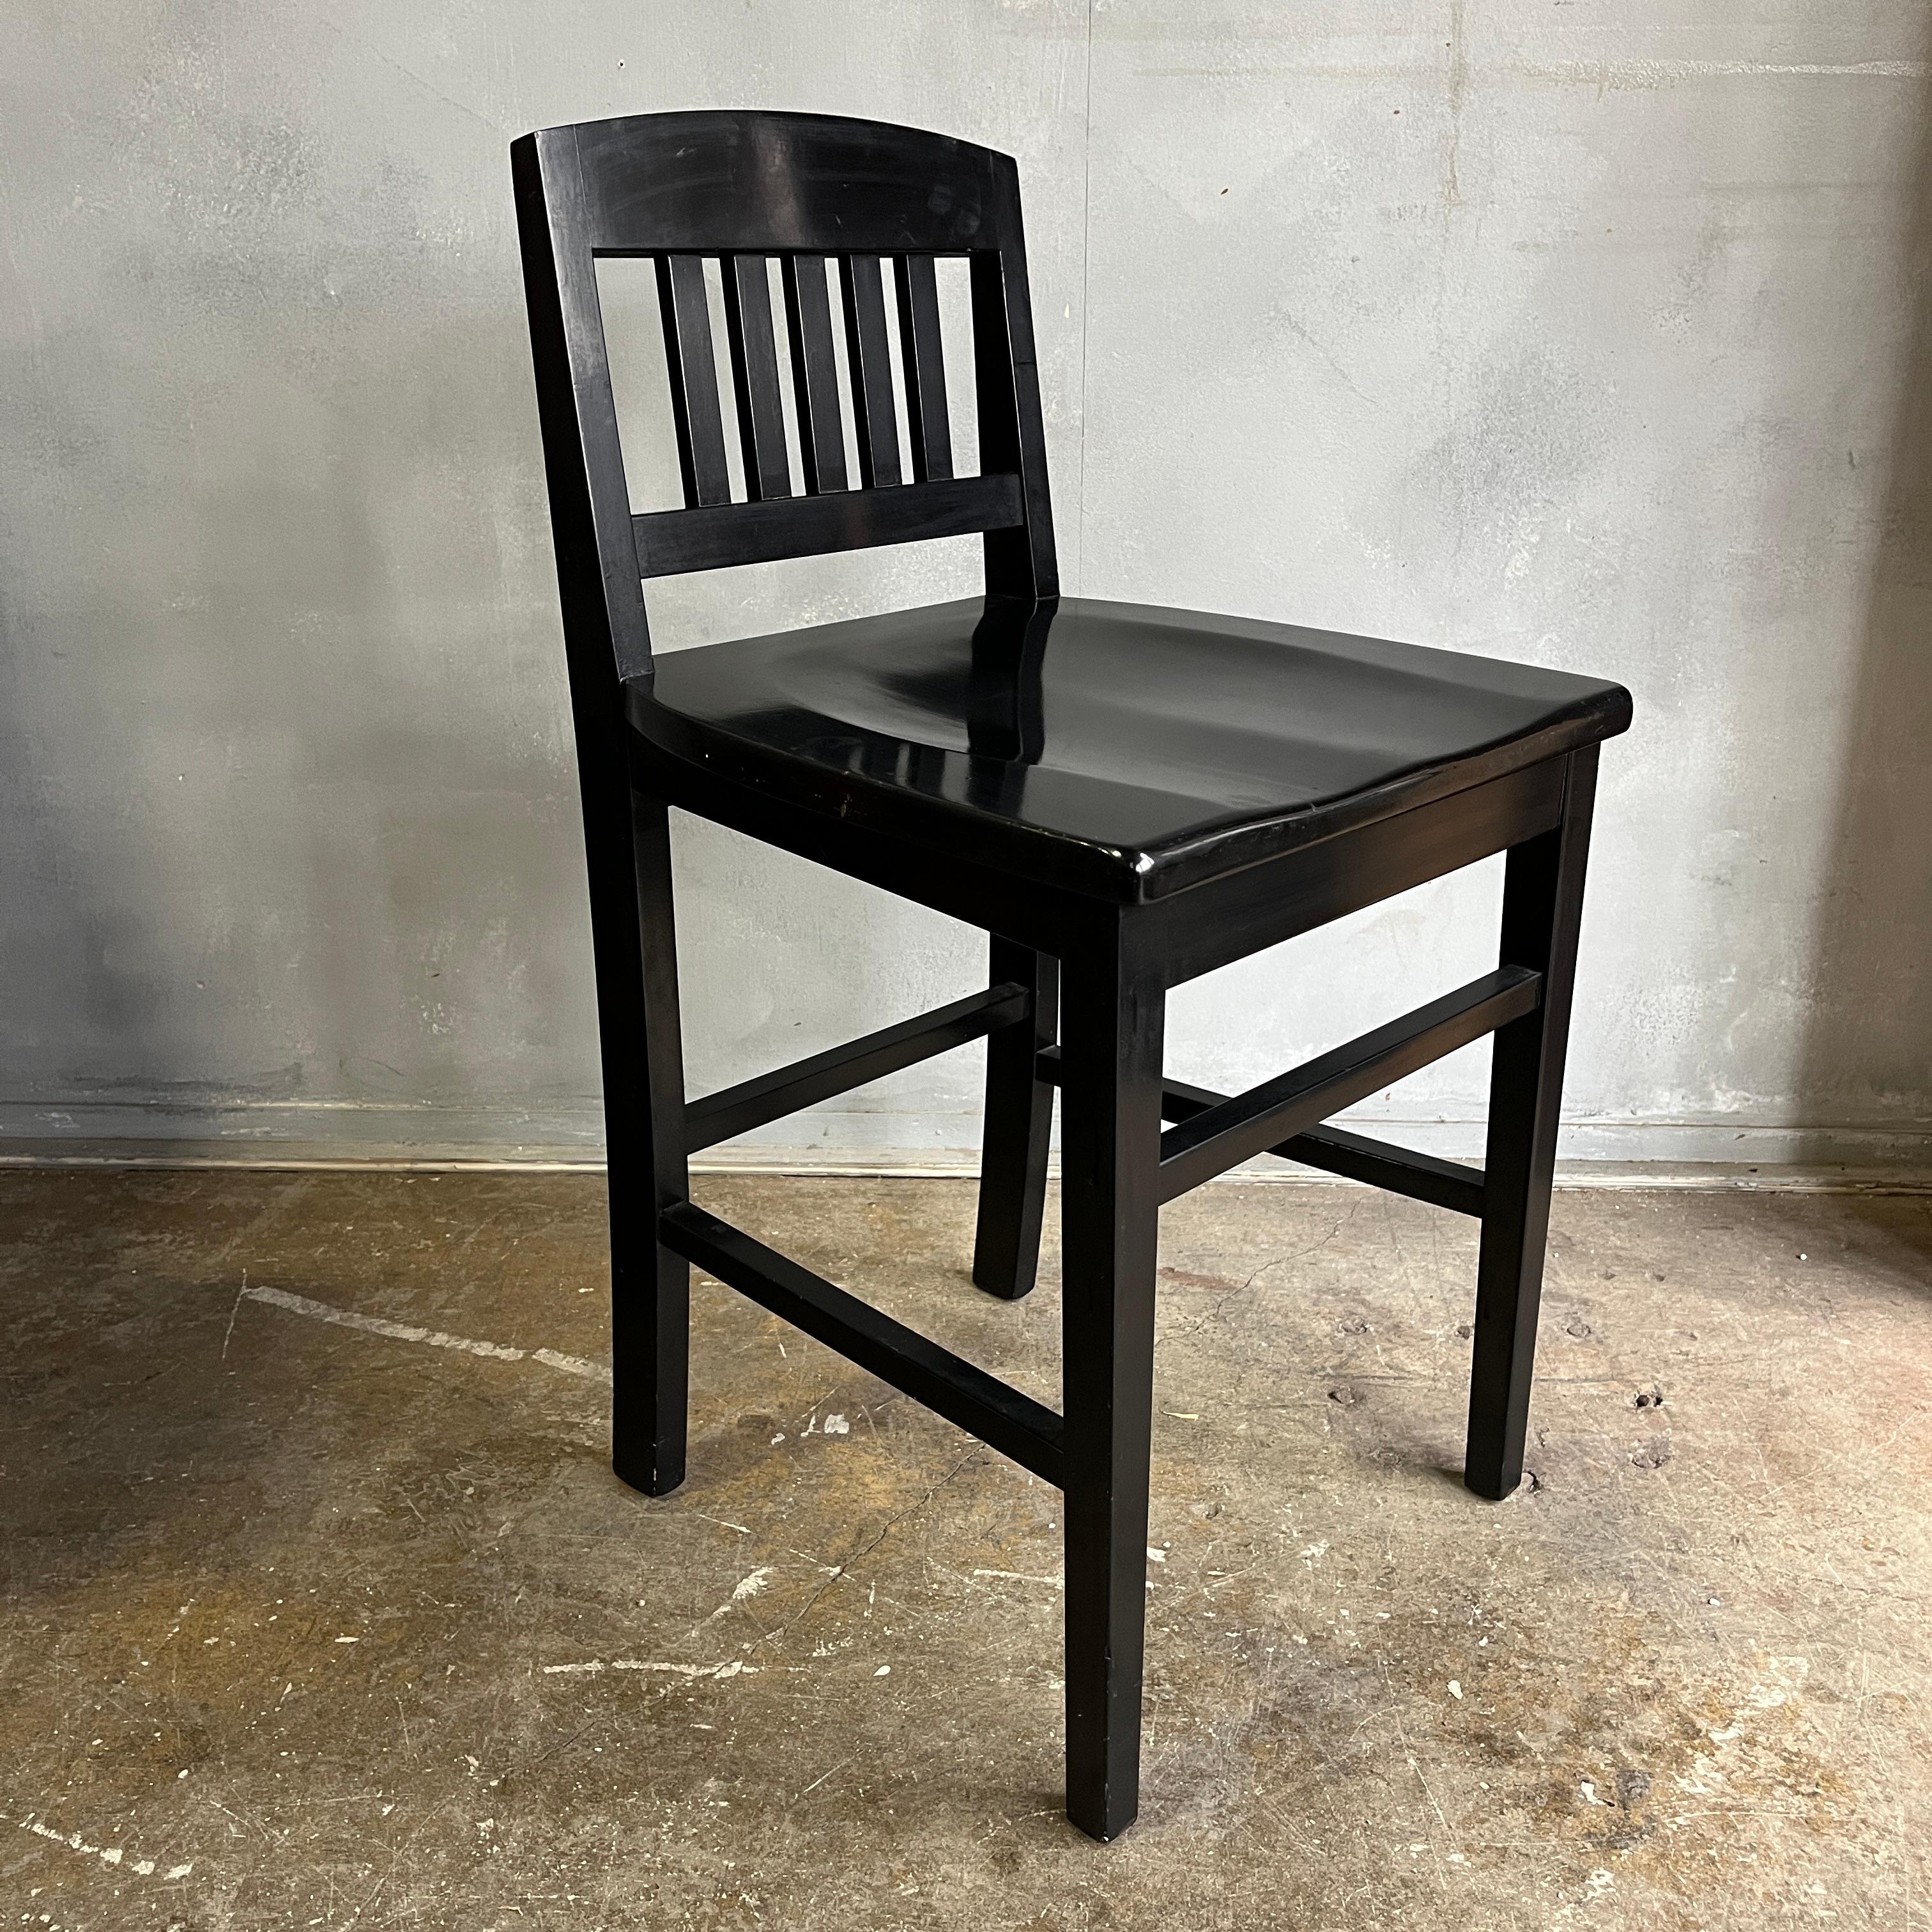 Gorgeous black chair that has either been lacquered or French Polished. All original finish and patina through-out this solid and sturdy chair. Striking design being both simple and sculptural. Very special wonderful design. In the style of Josef